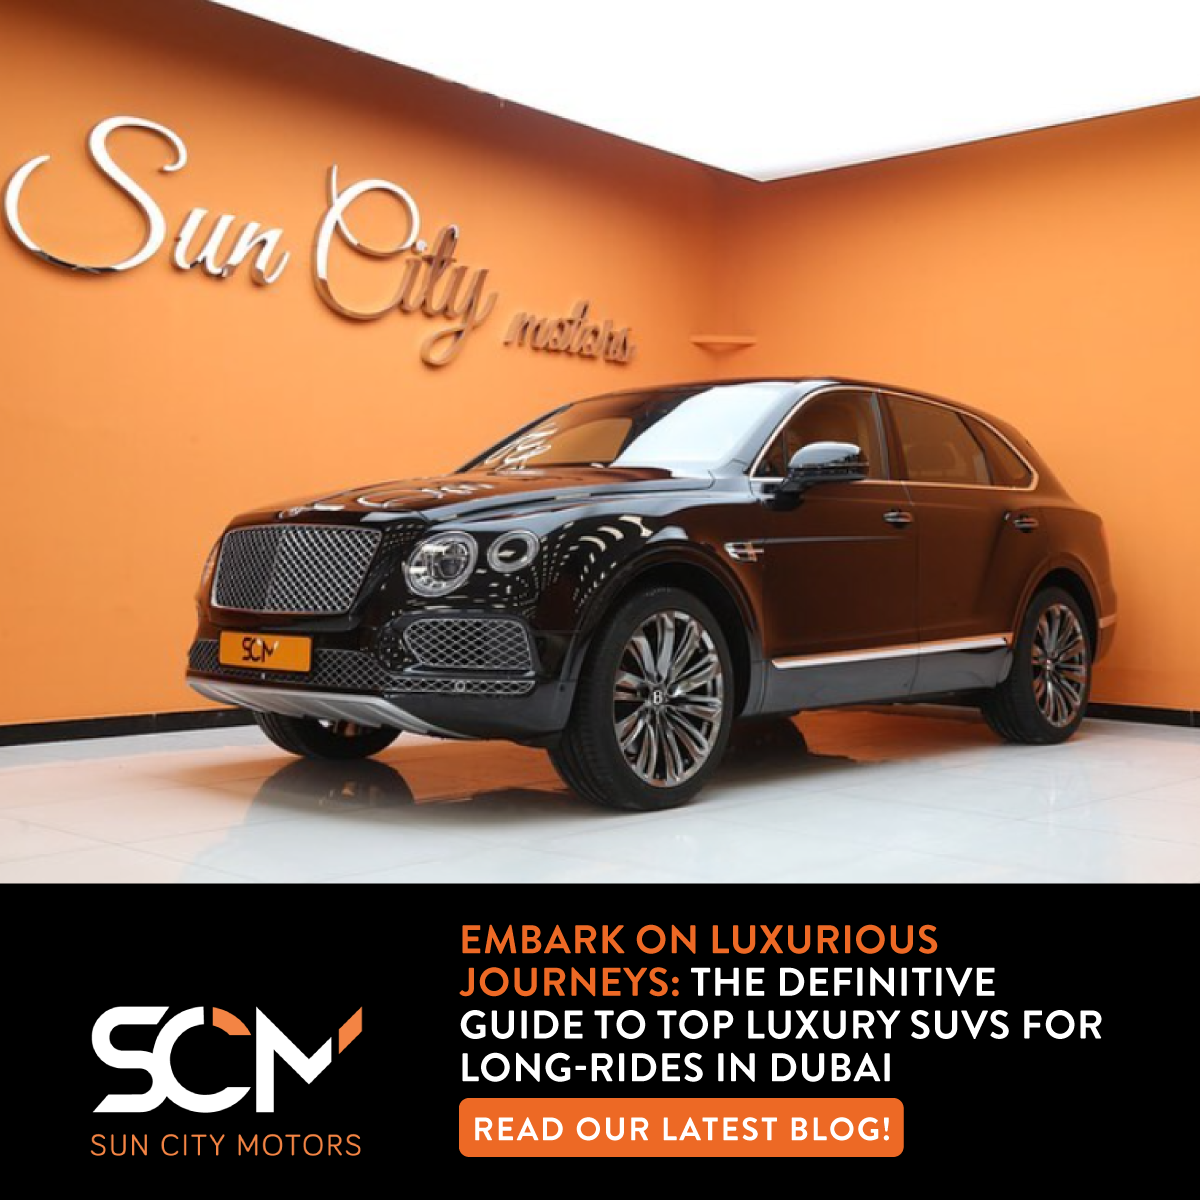 Embark on Luxurious Journeys: The Definitive Guide to Top Luxury SUVs for Long-Rides in Dubai